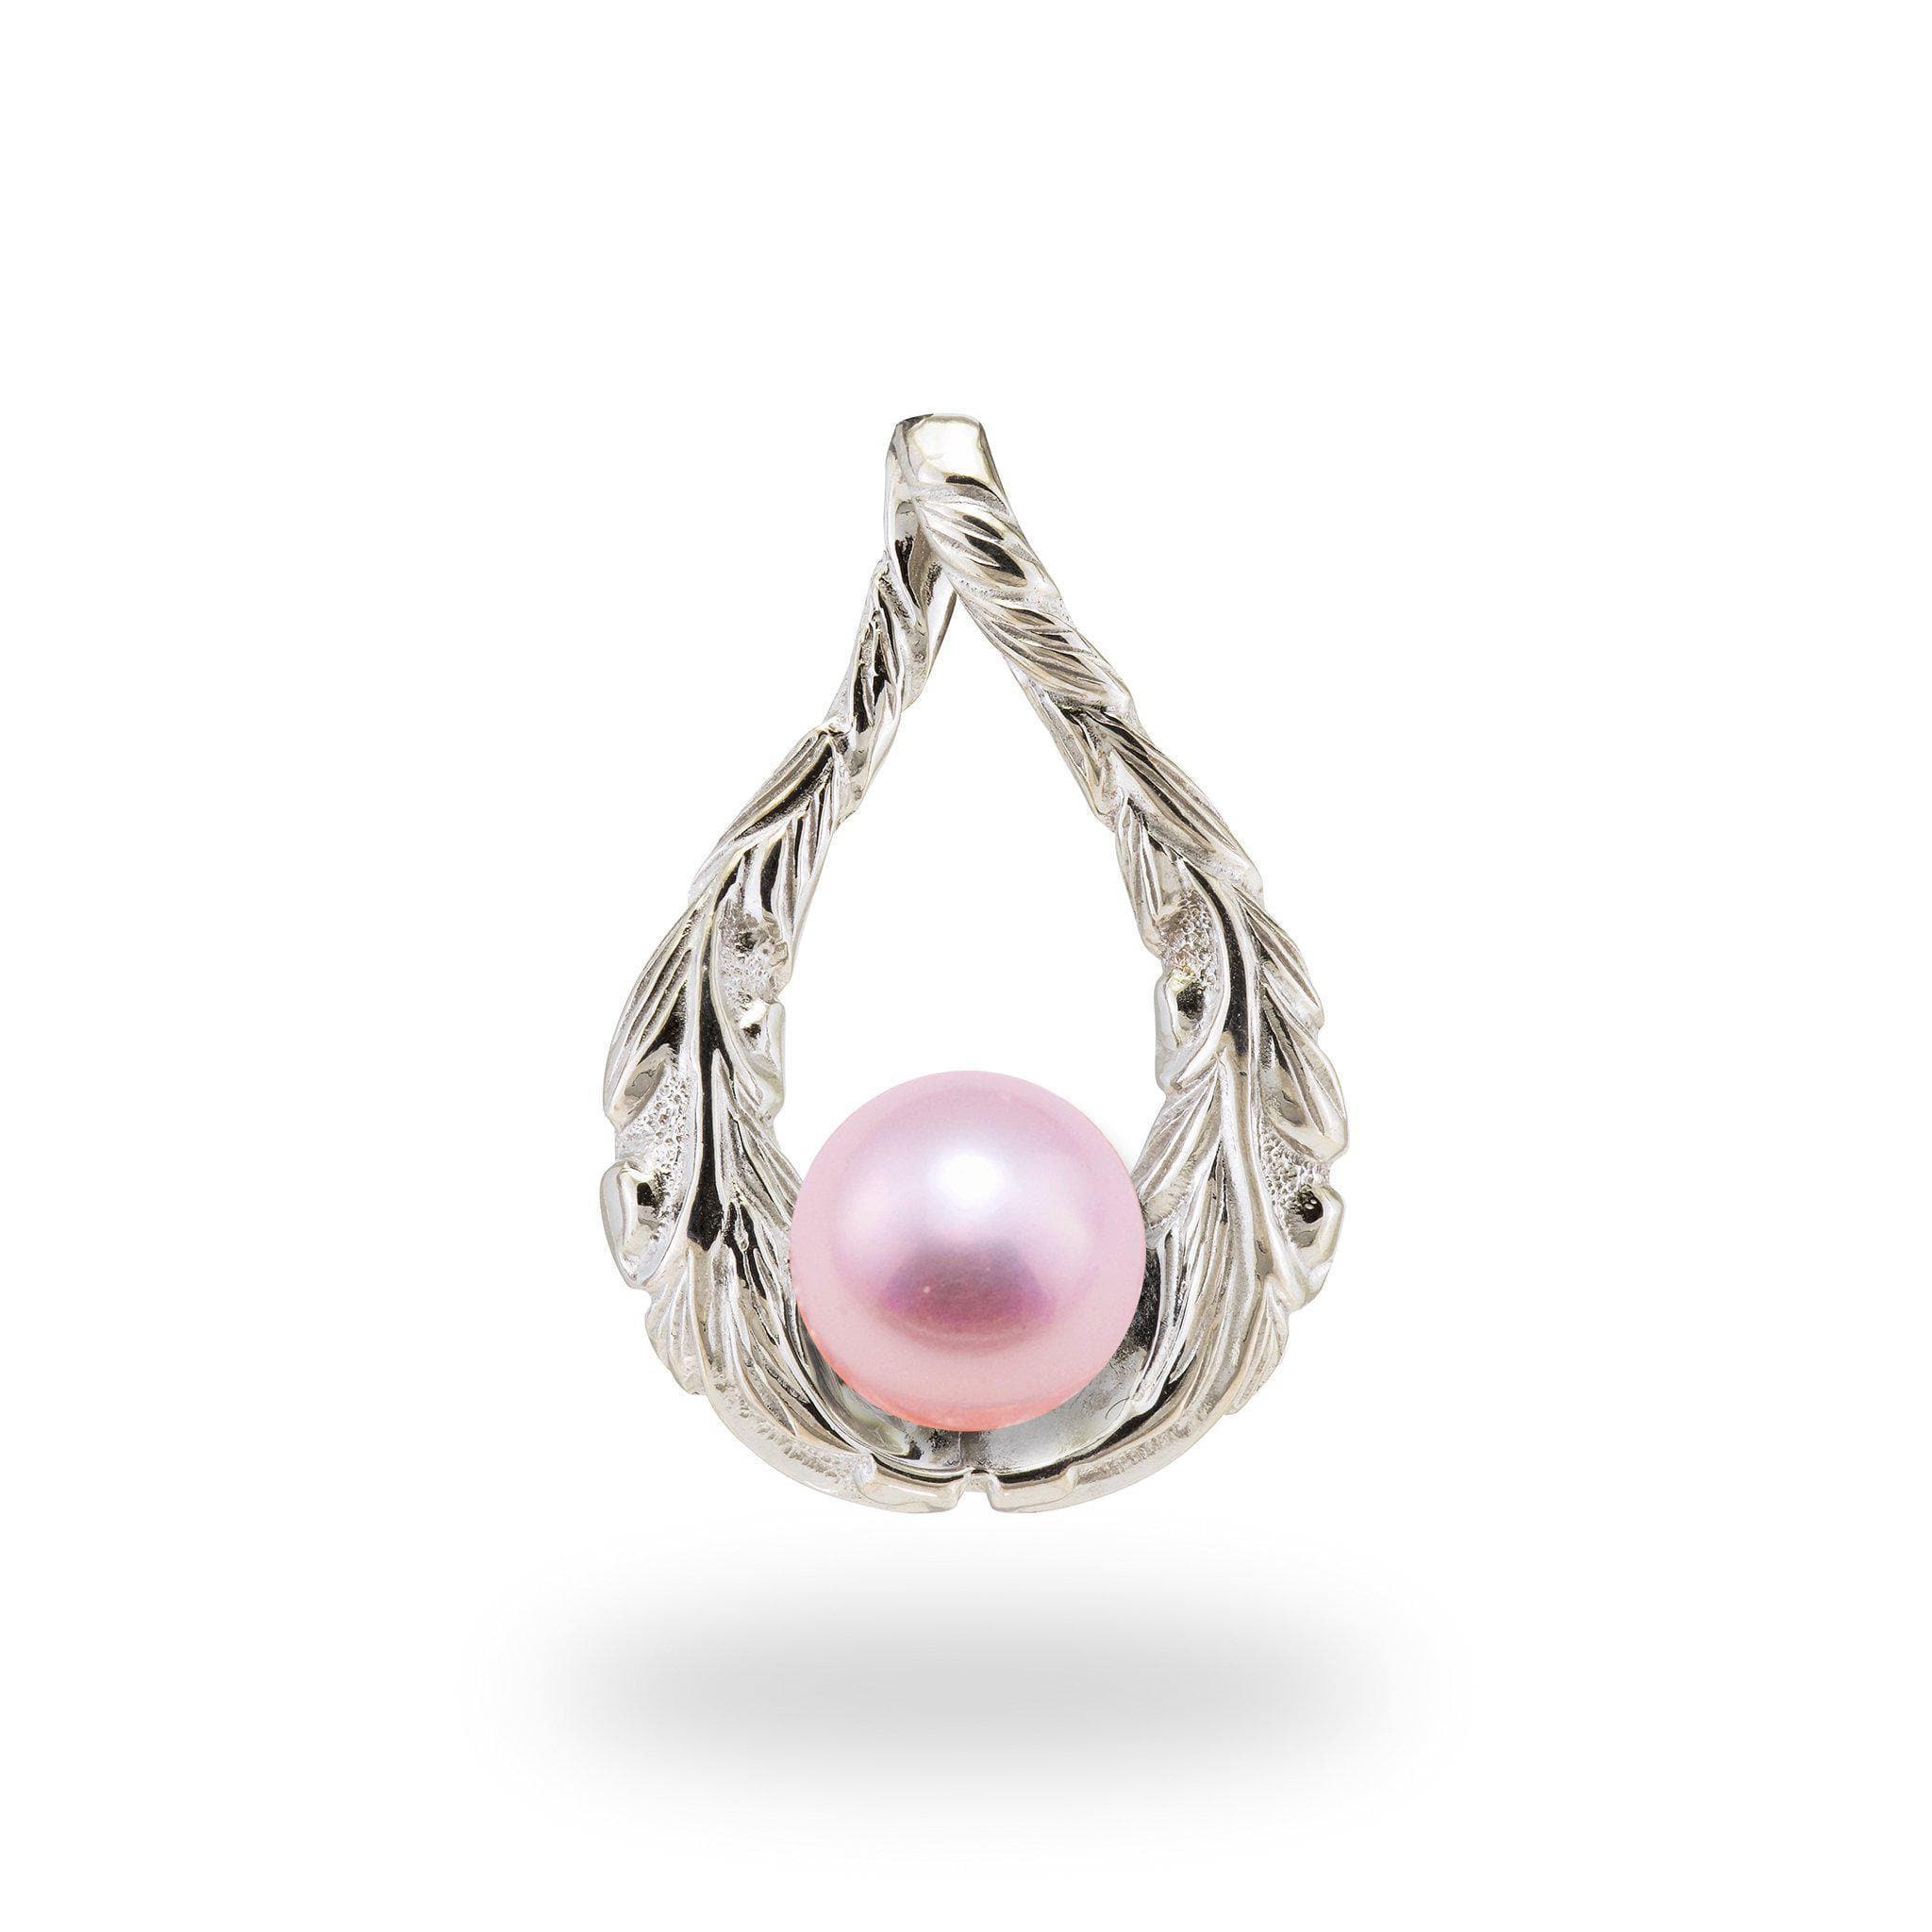 Old English Scroll Drop Pendant Mounting in Sterling Silver with Pink Pearl- Maui Divers Jewelry